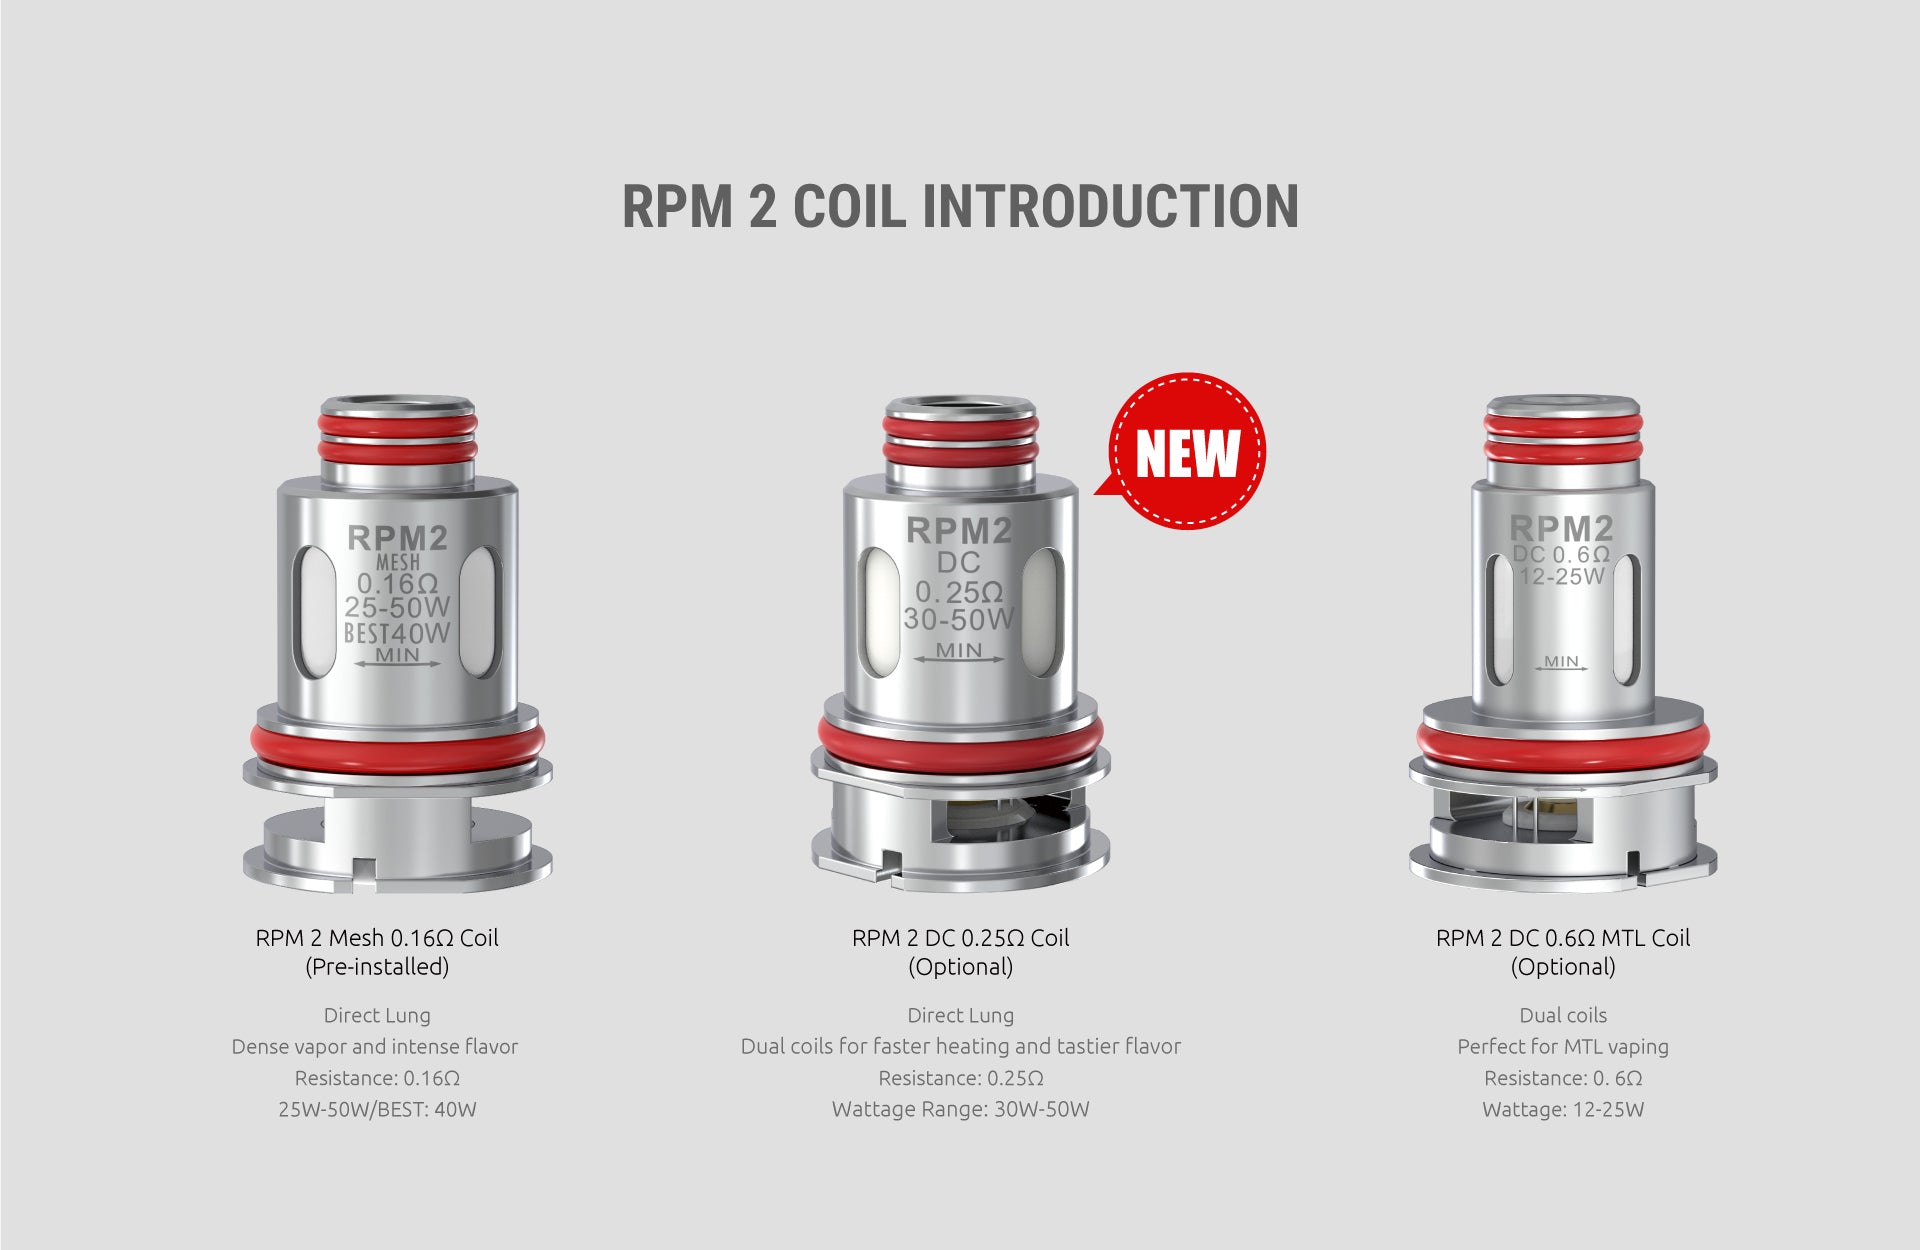 SMOK-RPM2-Coil-meshed-0.16-genuine-0.6-DL MTL 5 Pack-3new